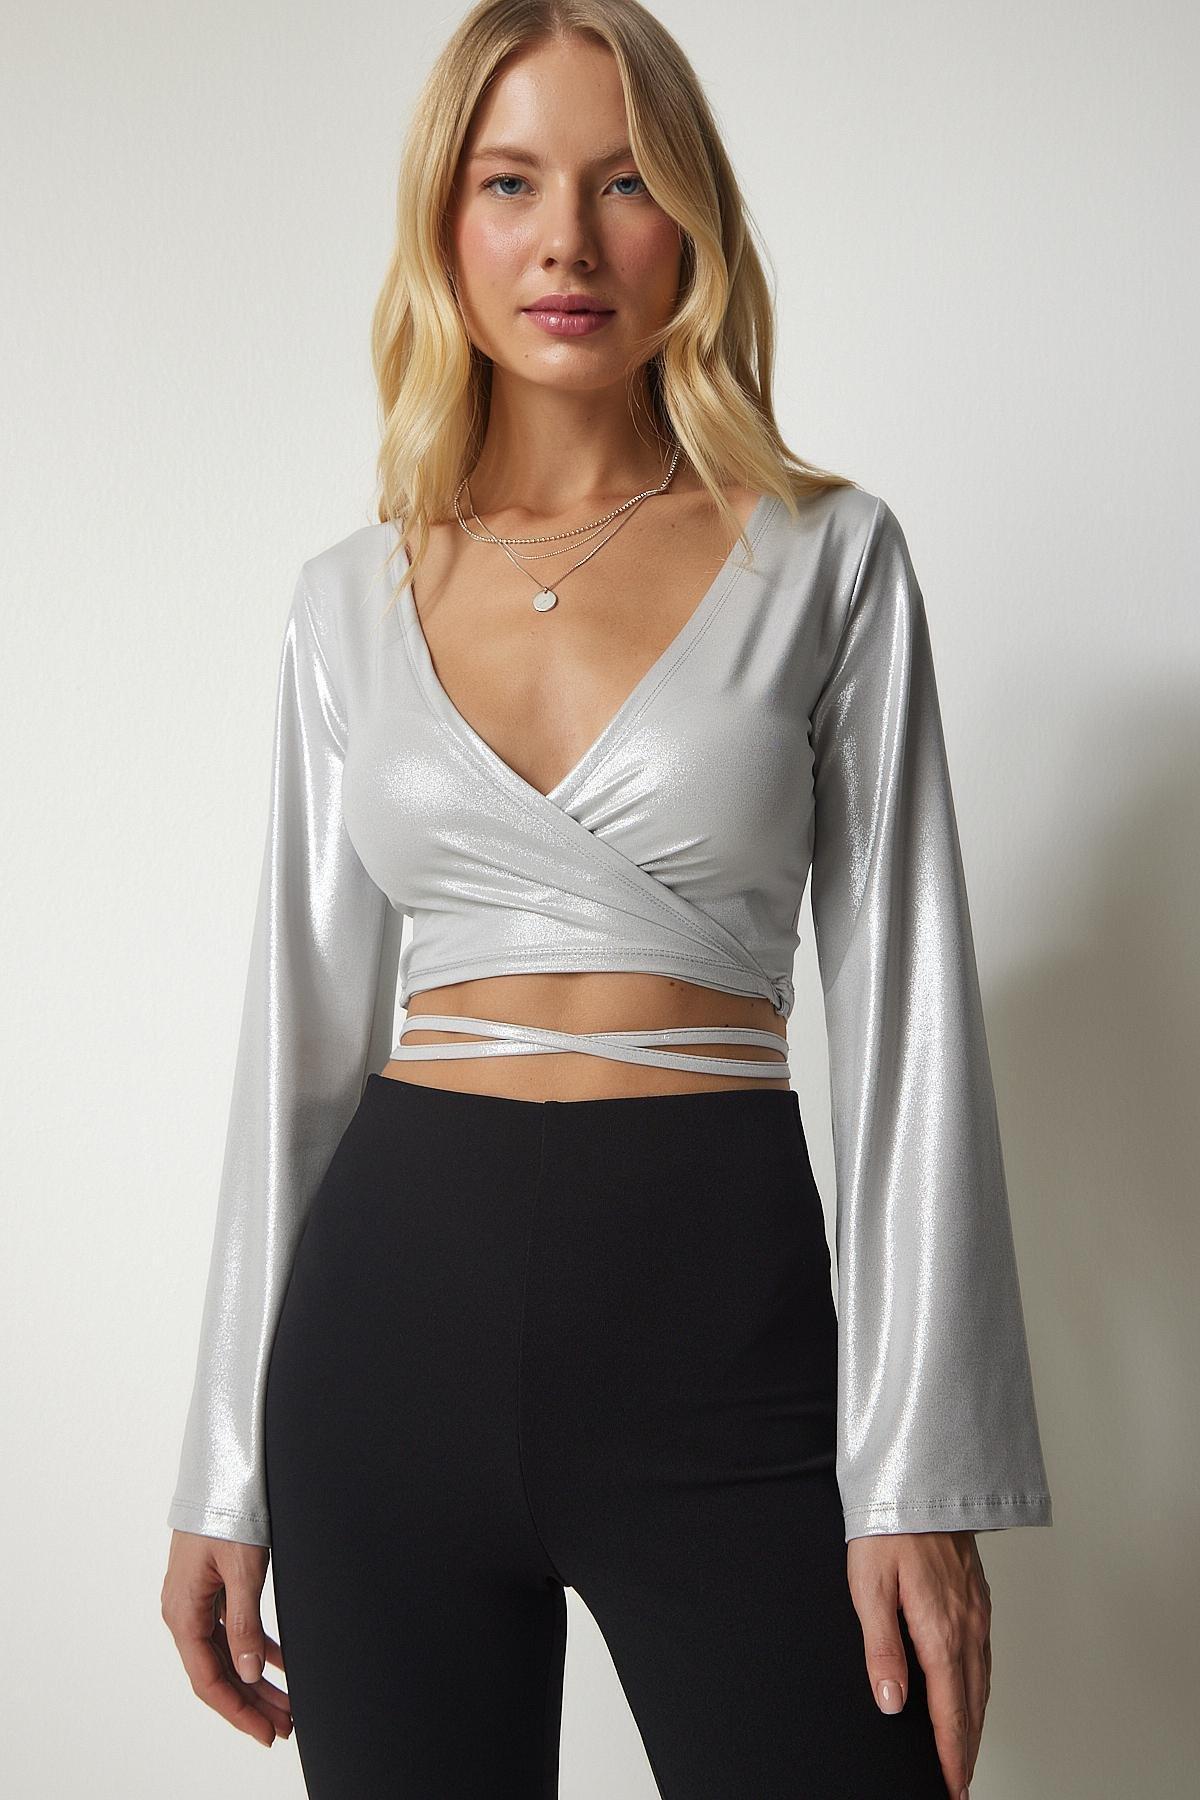 Happiness Istanbul - Gray Zip-Up Sparkle Crop Top